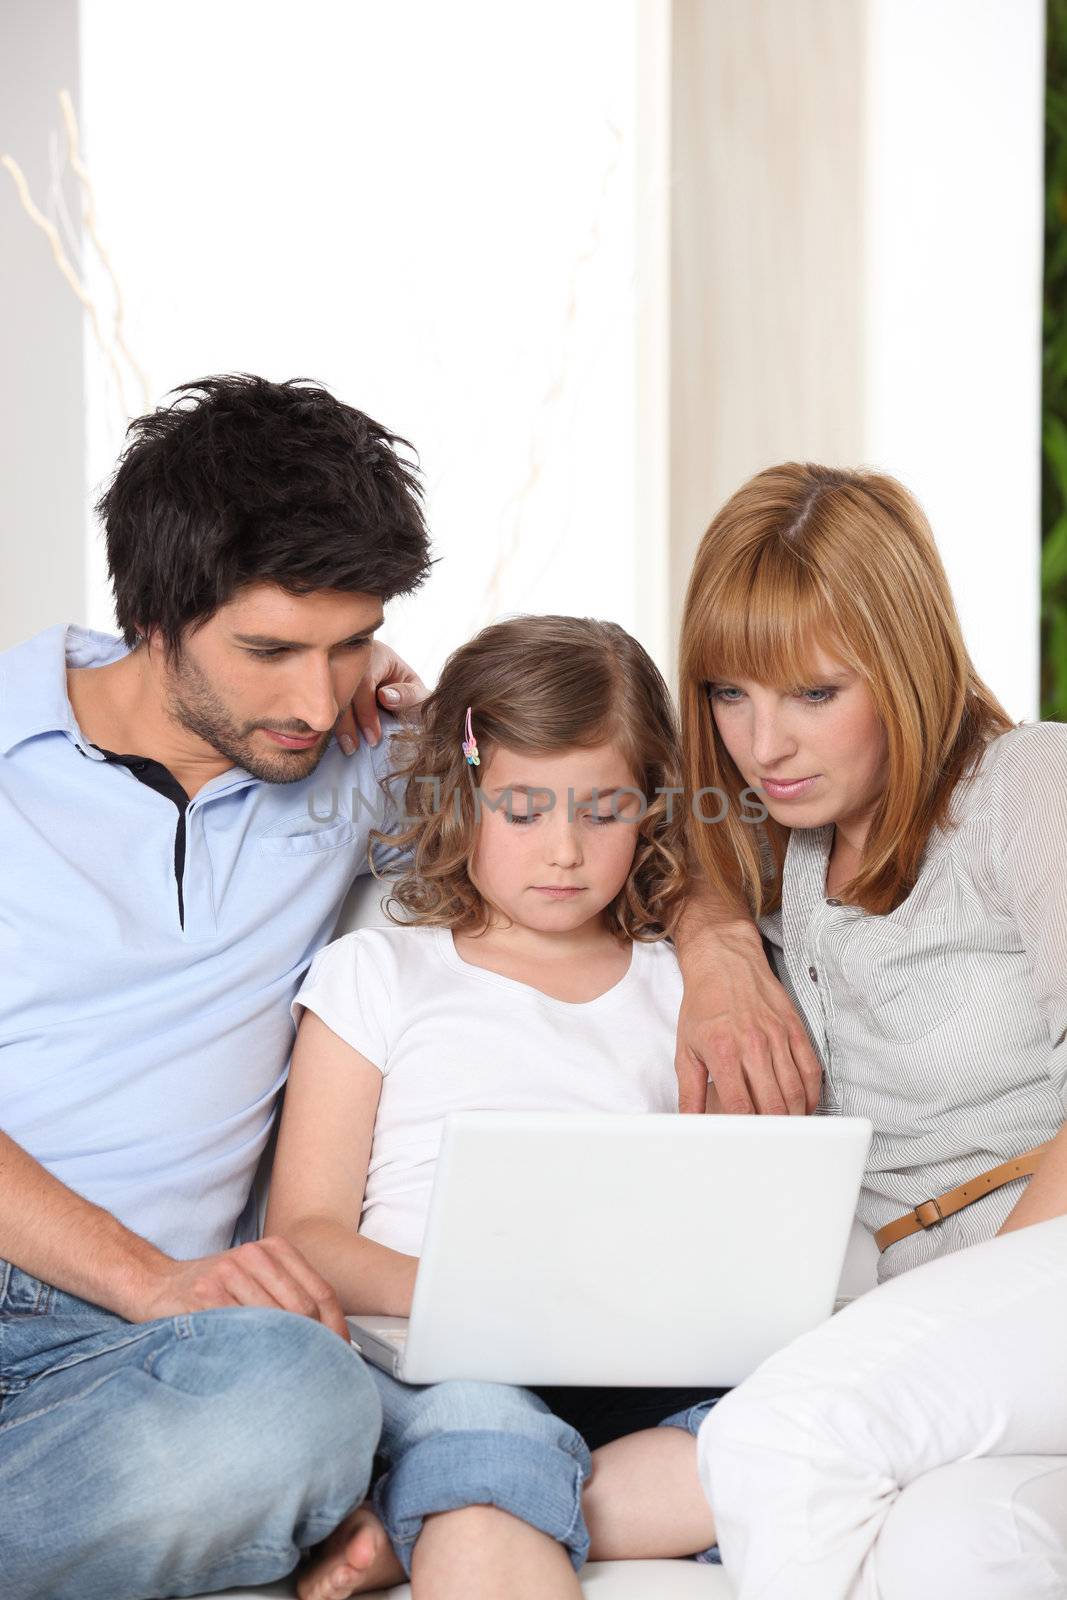 couple with daughter and laptop on sofa